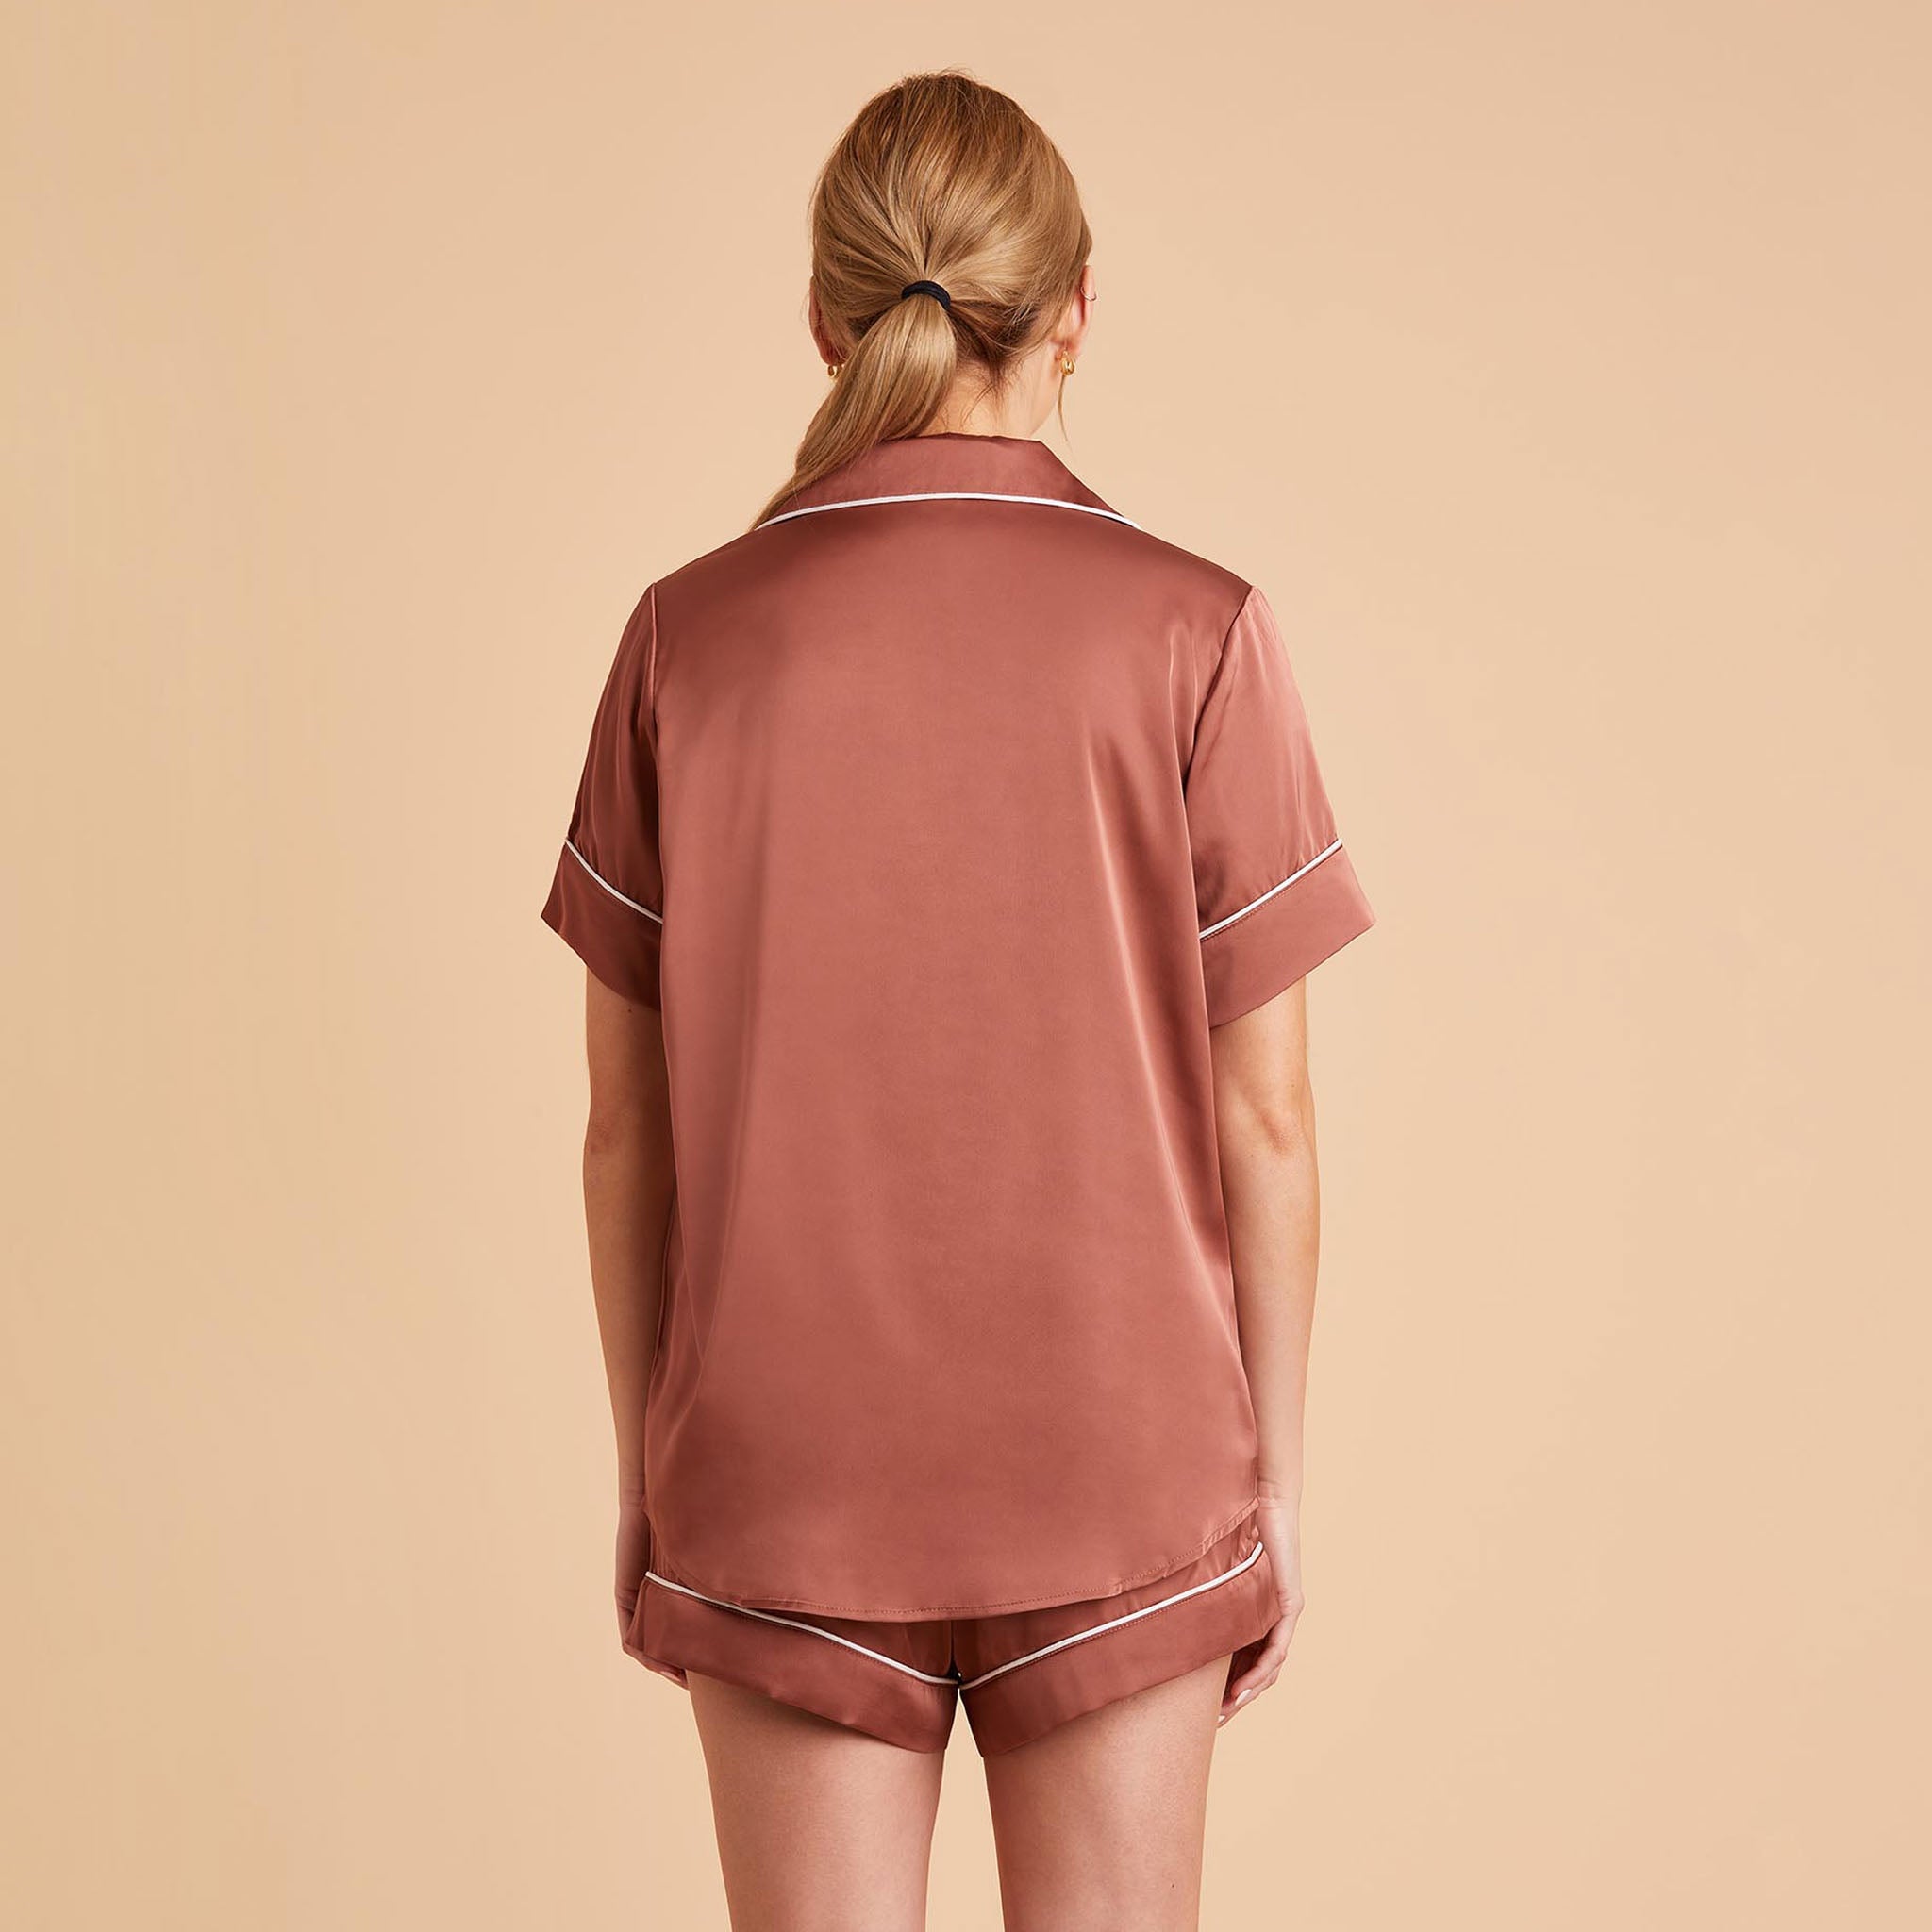 Jonny Satin Short Sleeve Bridesmaid Pajamas With White Piping in desert rose, back view